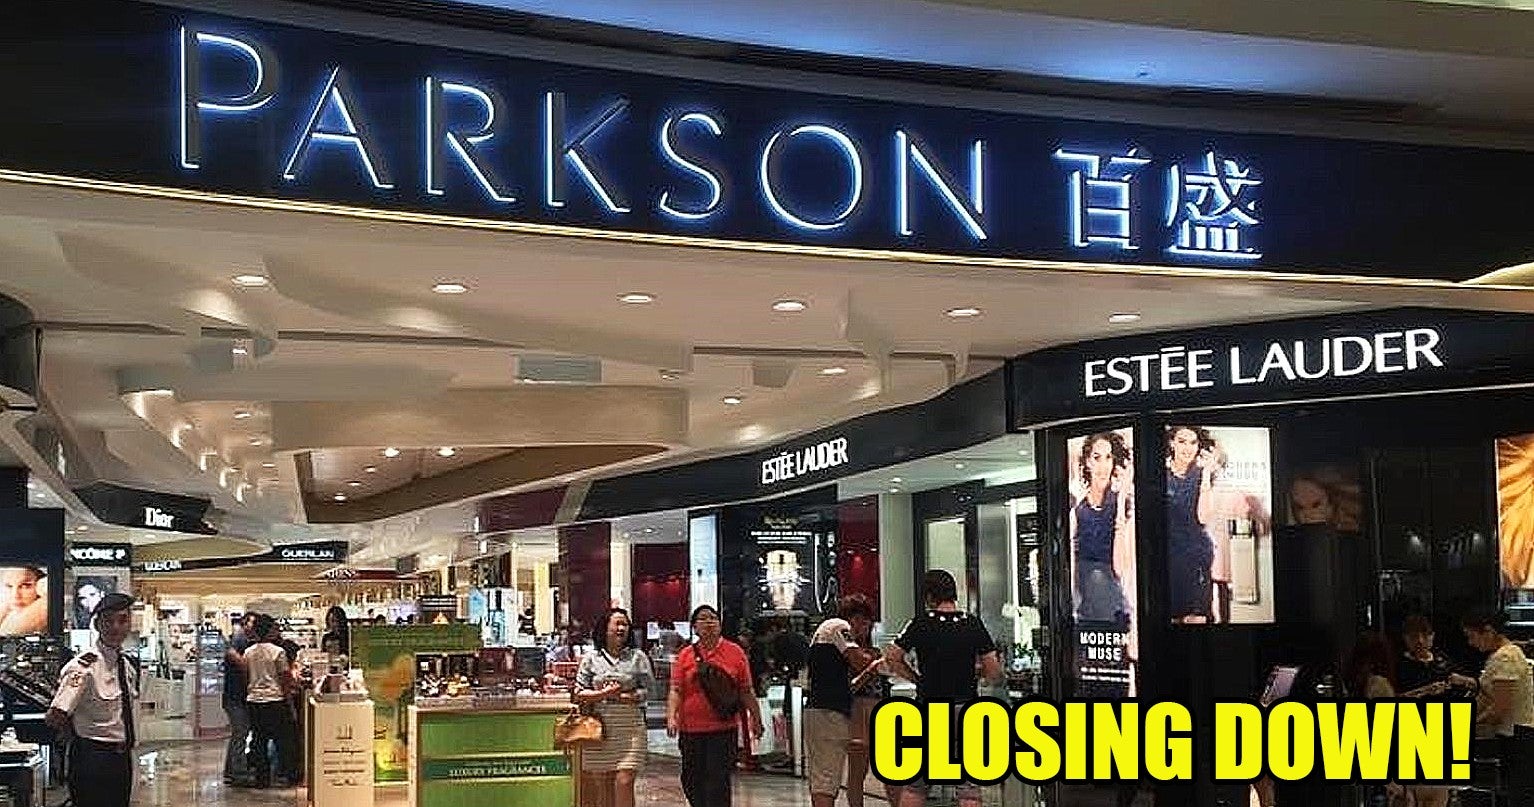 Parkson Suria Klcc Is Shutting Down After 20 Years &Amp; They Are Having A Sale Until 17 Feb - World Of Buzz